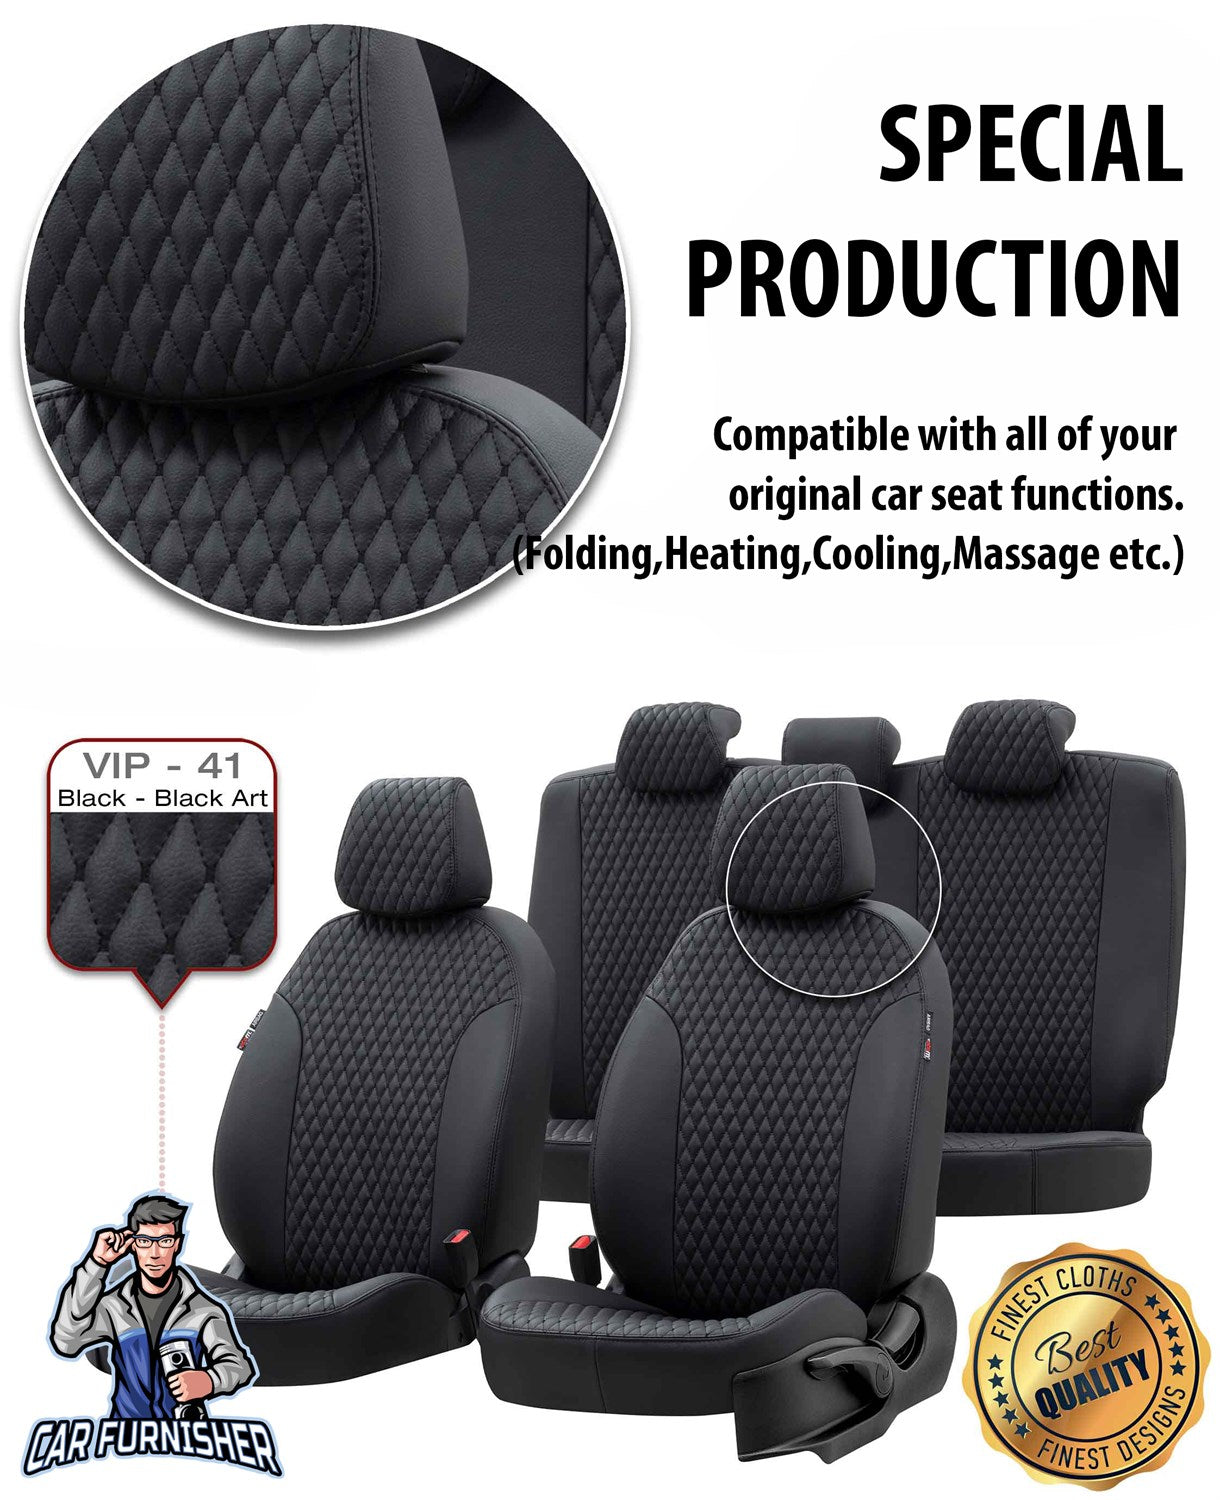 Mercedes B Class Seat Covers Amsterdam Leather Design Dark Gray Leather